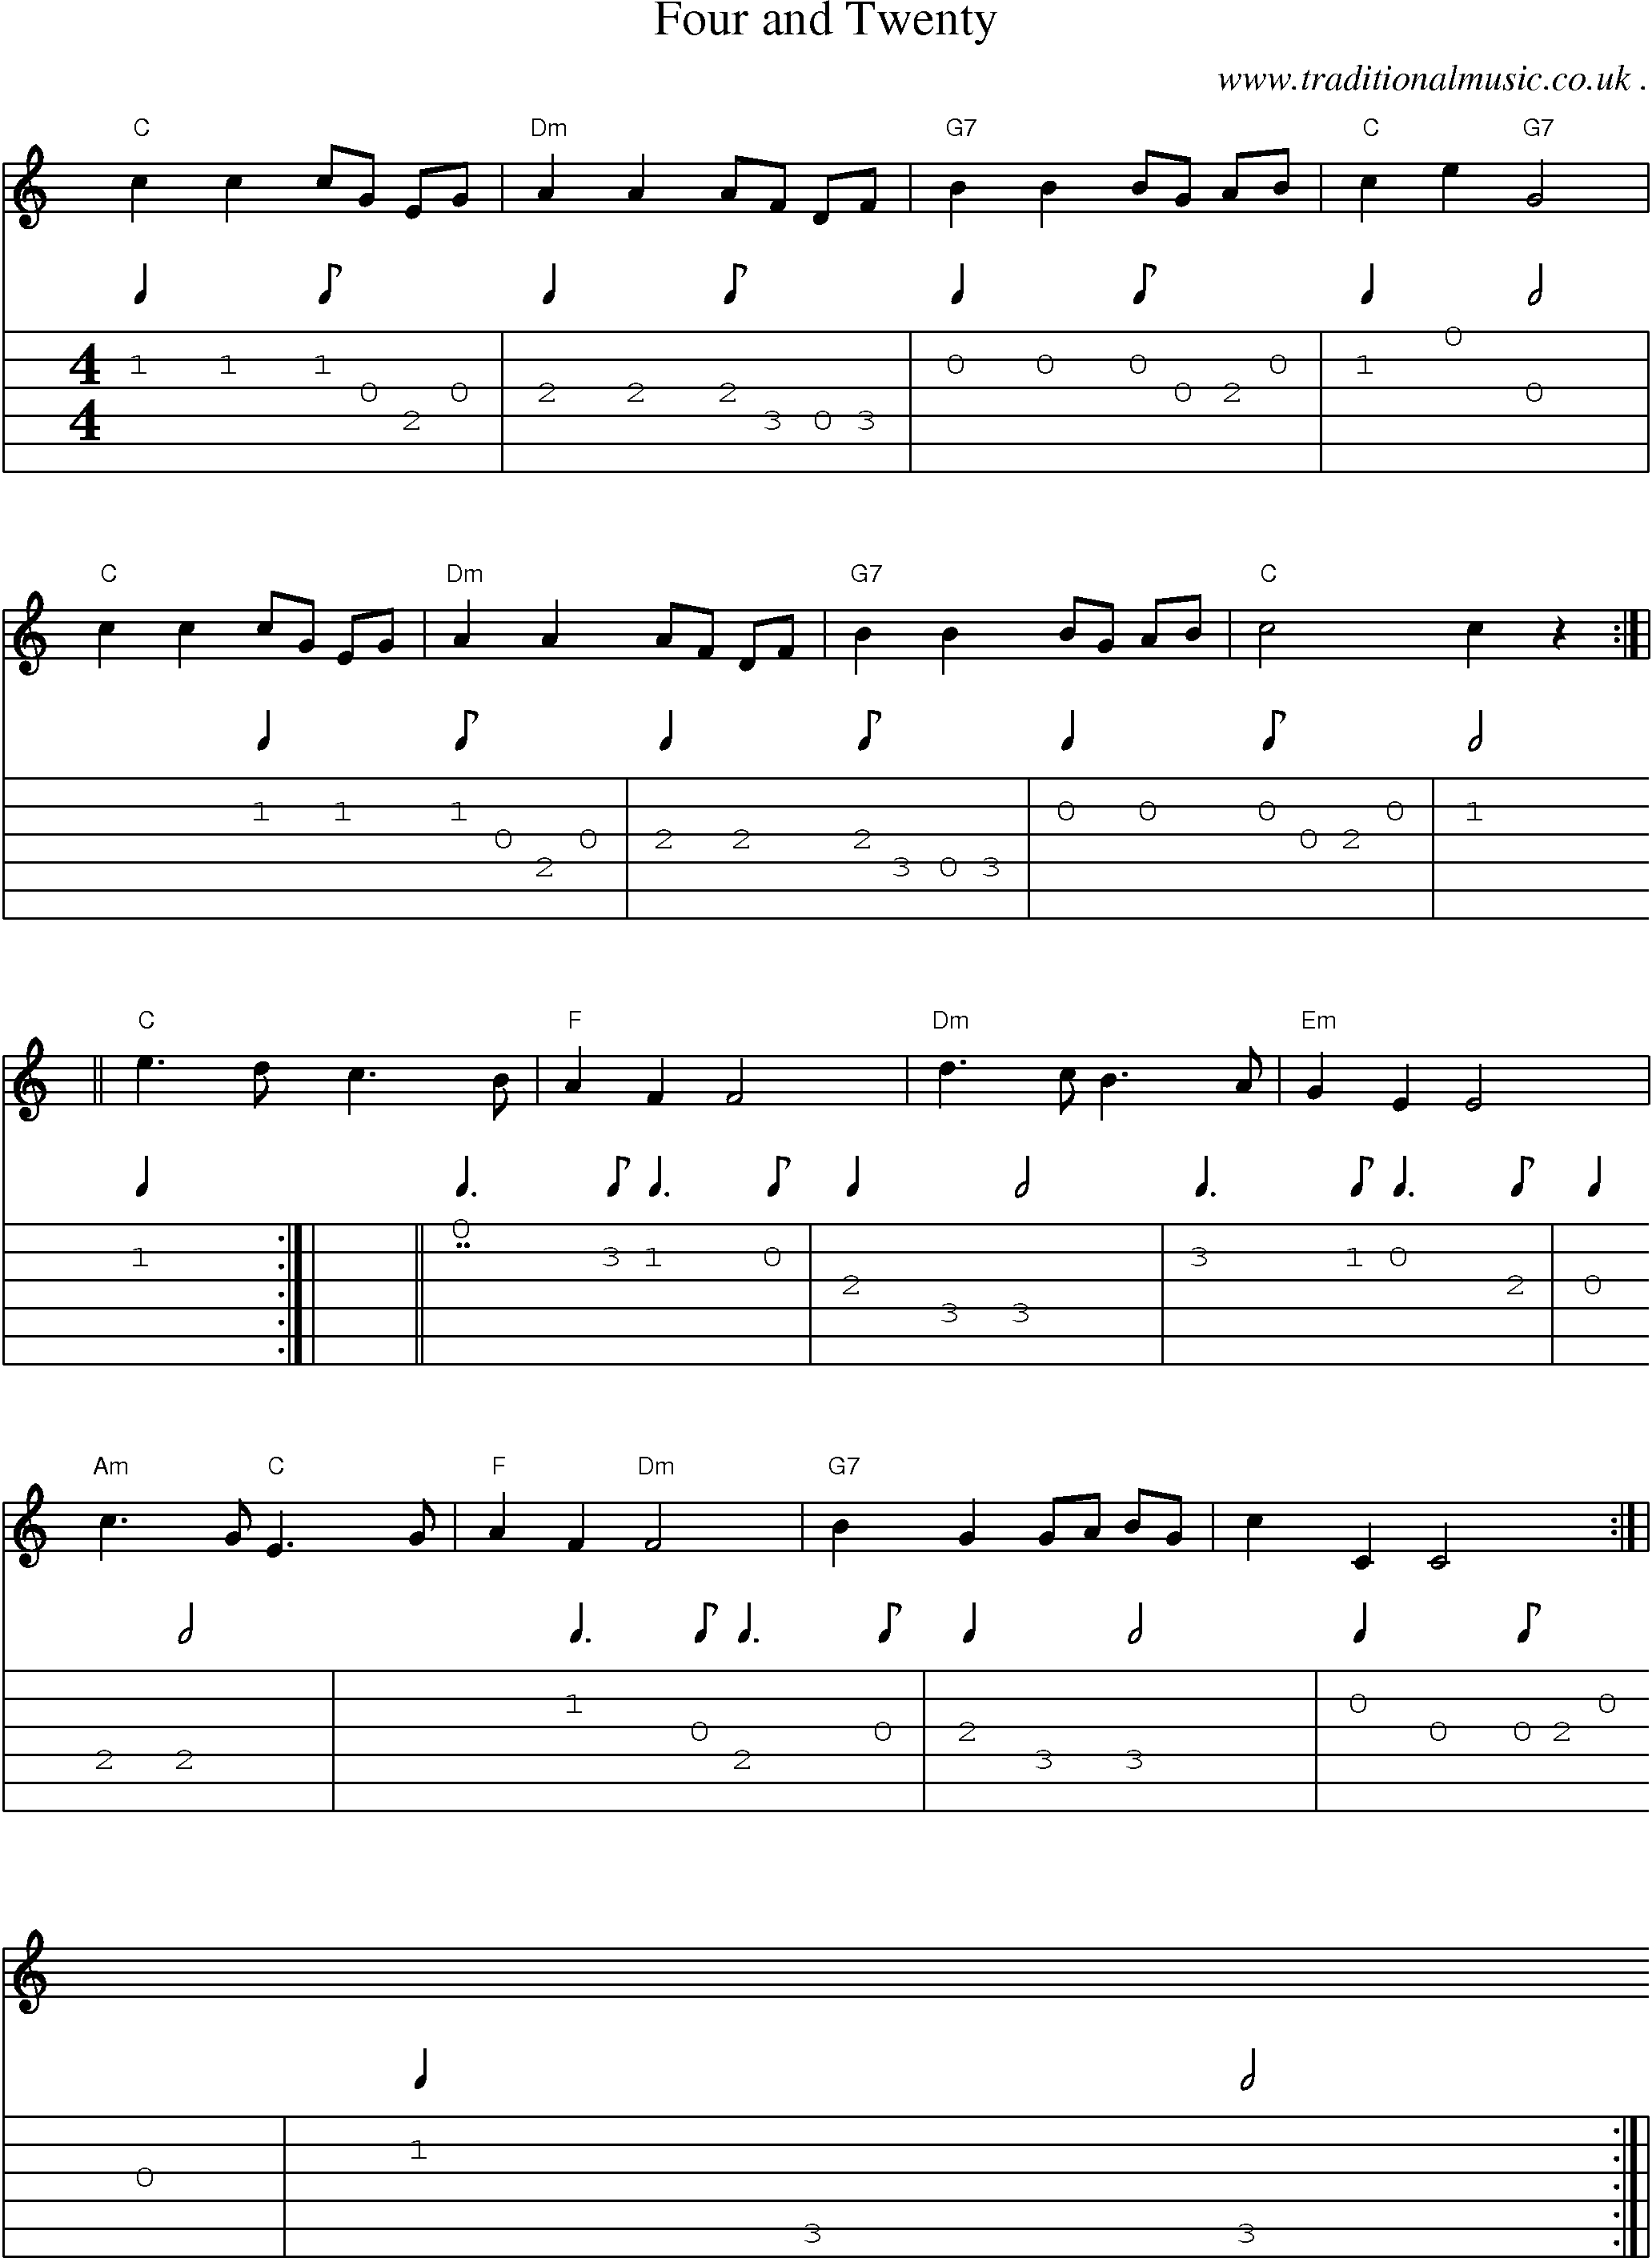 Sheet-music  score, Chords and Guitar Tabs for Four And Twenty